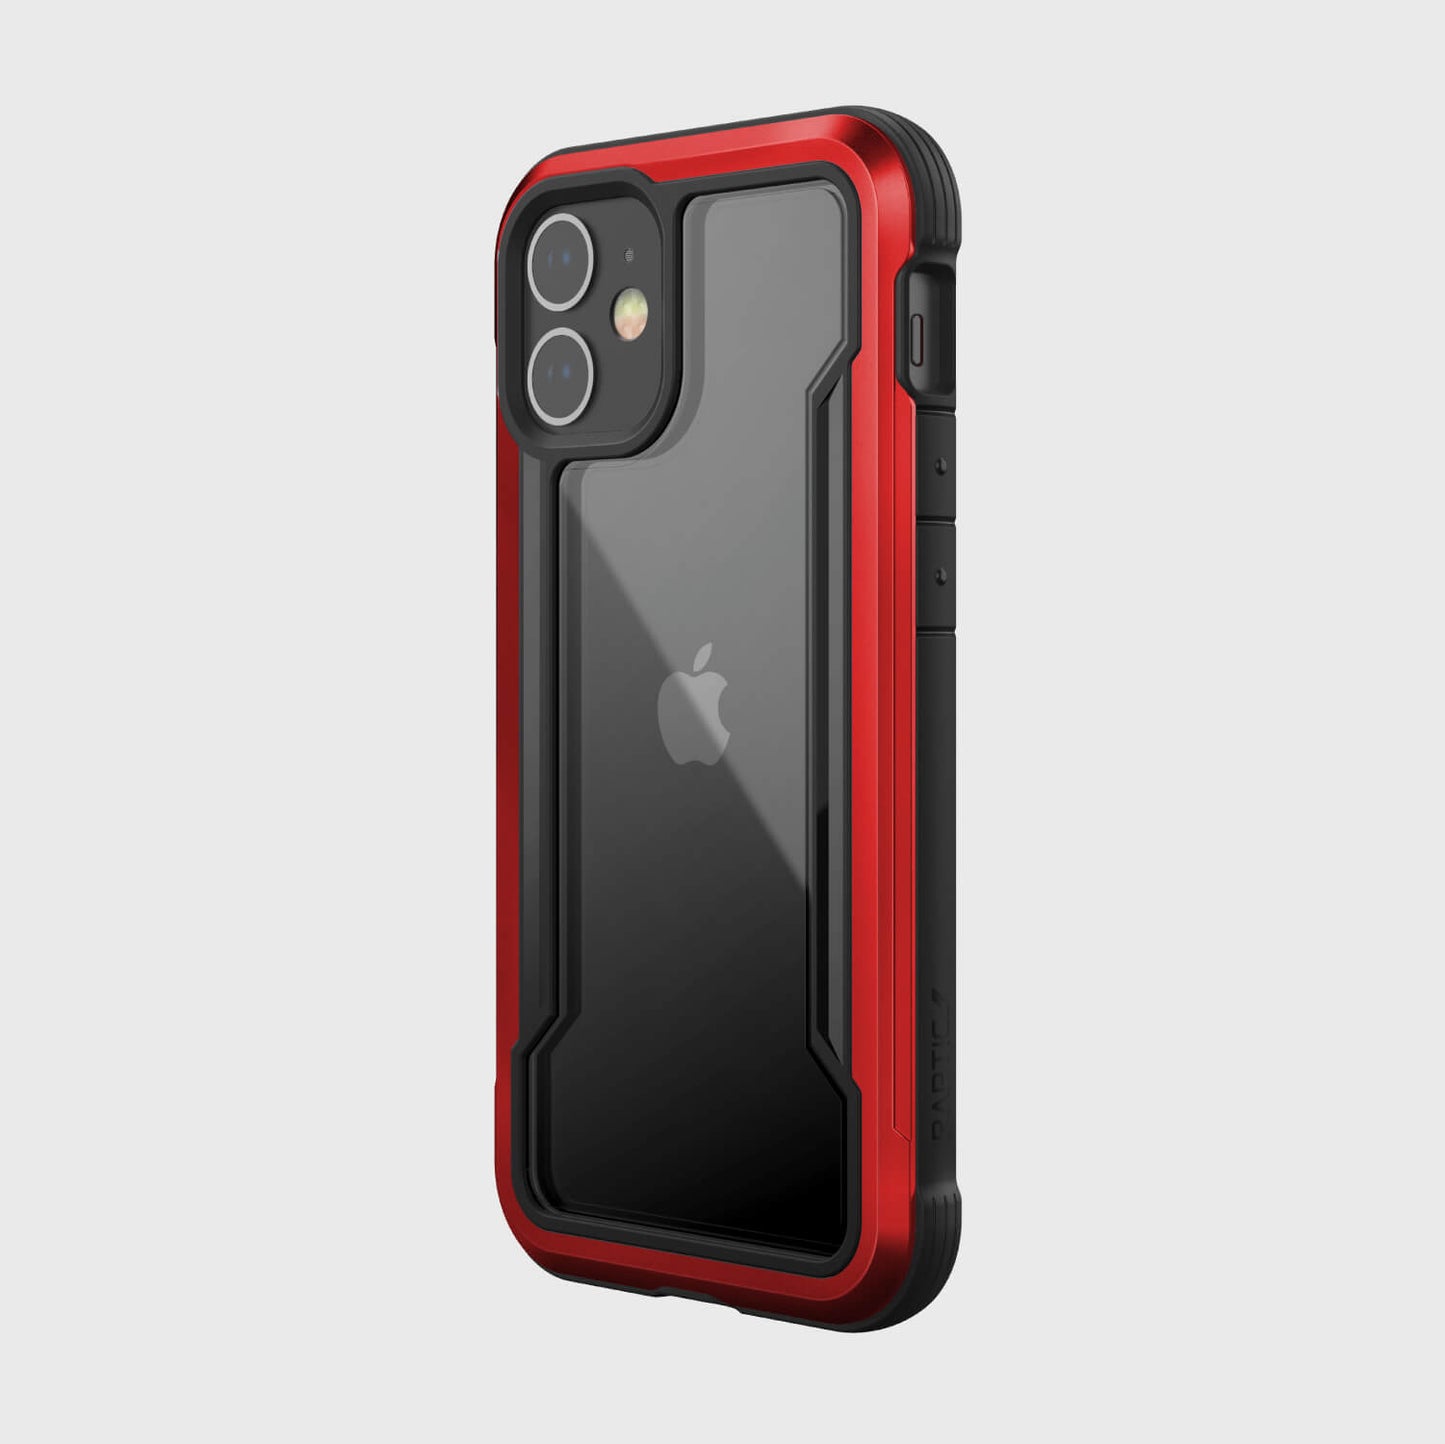 A red and black iPhone 12 Mini Case - SHIELD.